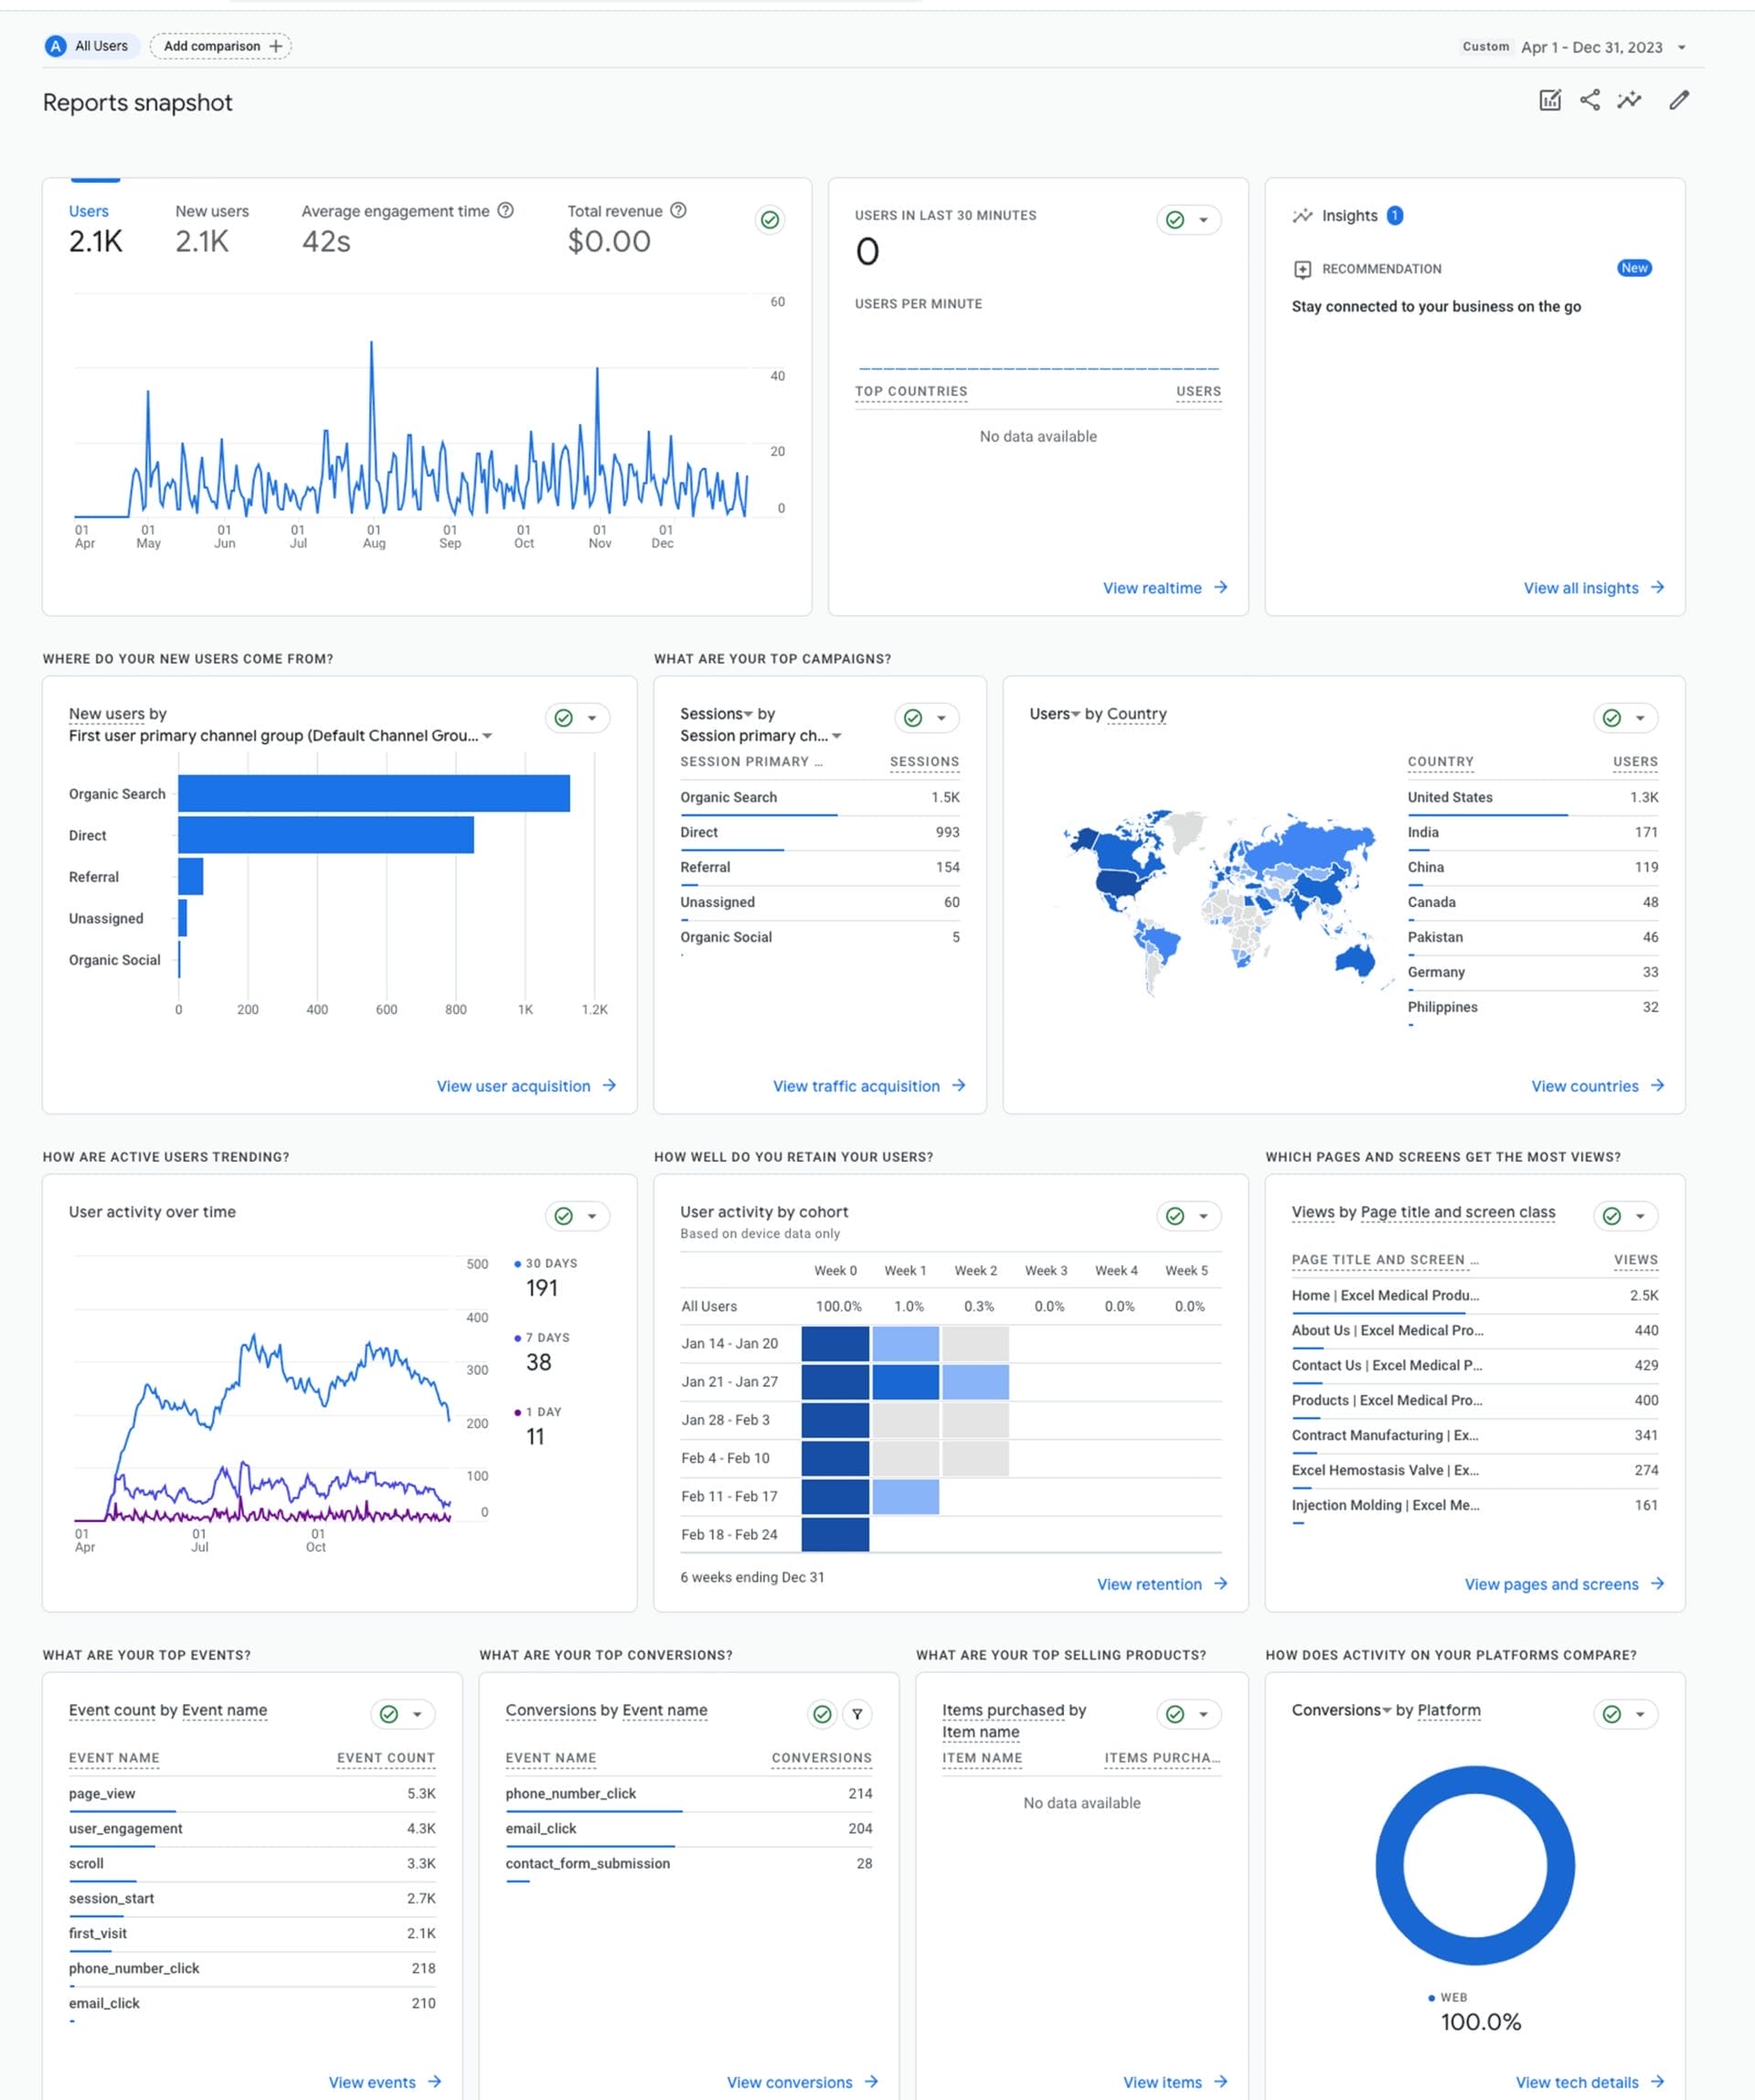 Excel Medical Products' display of the data from Google Analytics 4.